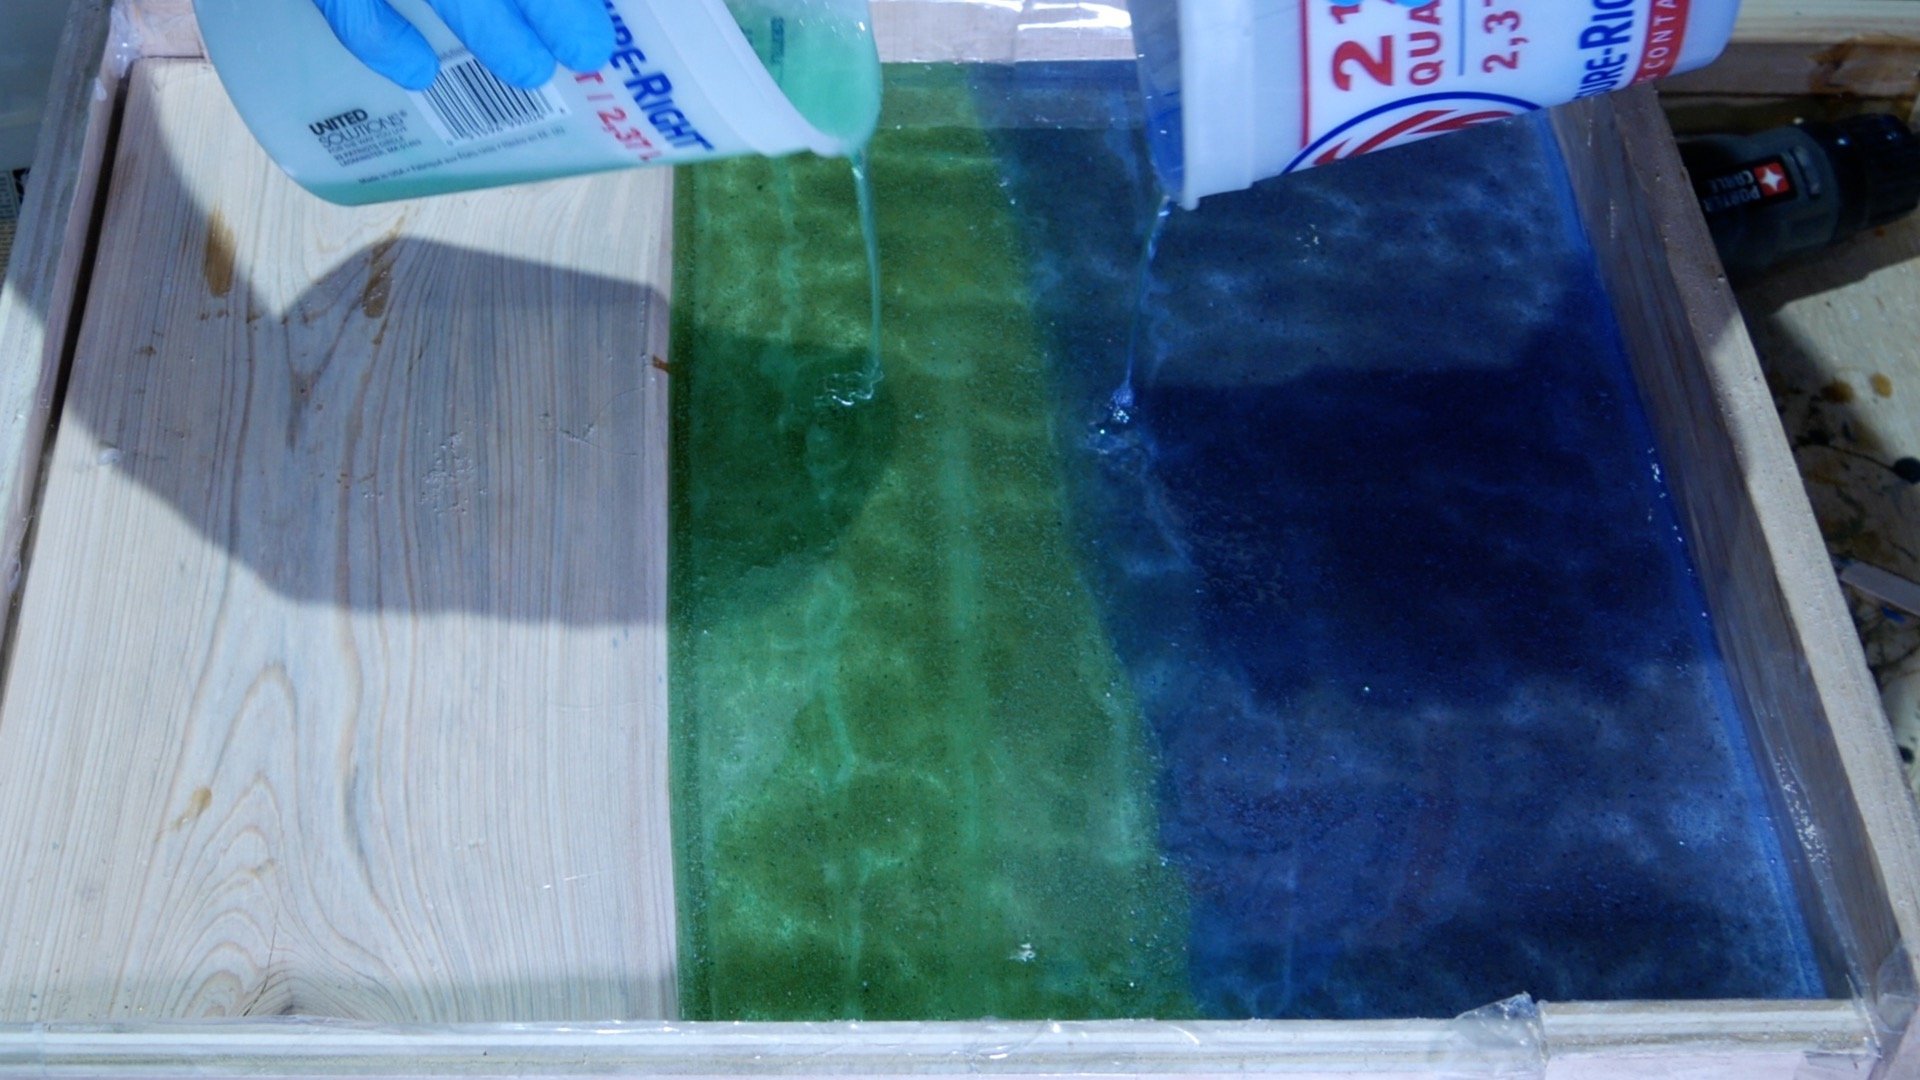 DIY Wood and Resin Beach Art with Real Sand_second pour with 2 transparent dye colors 2